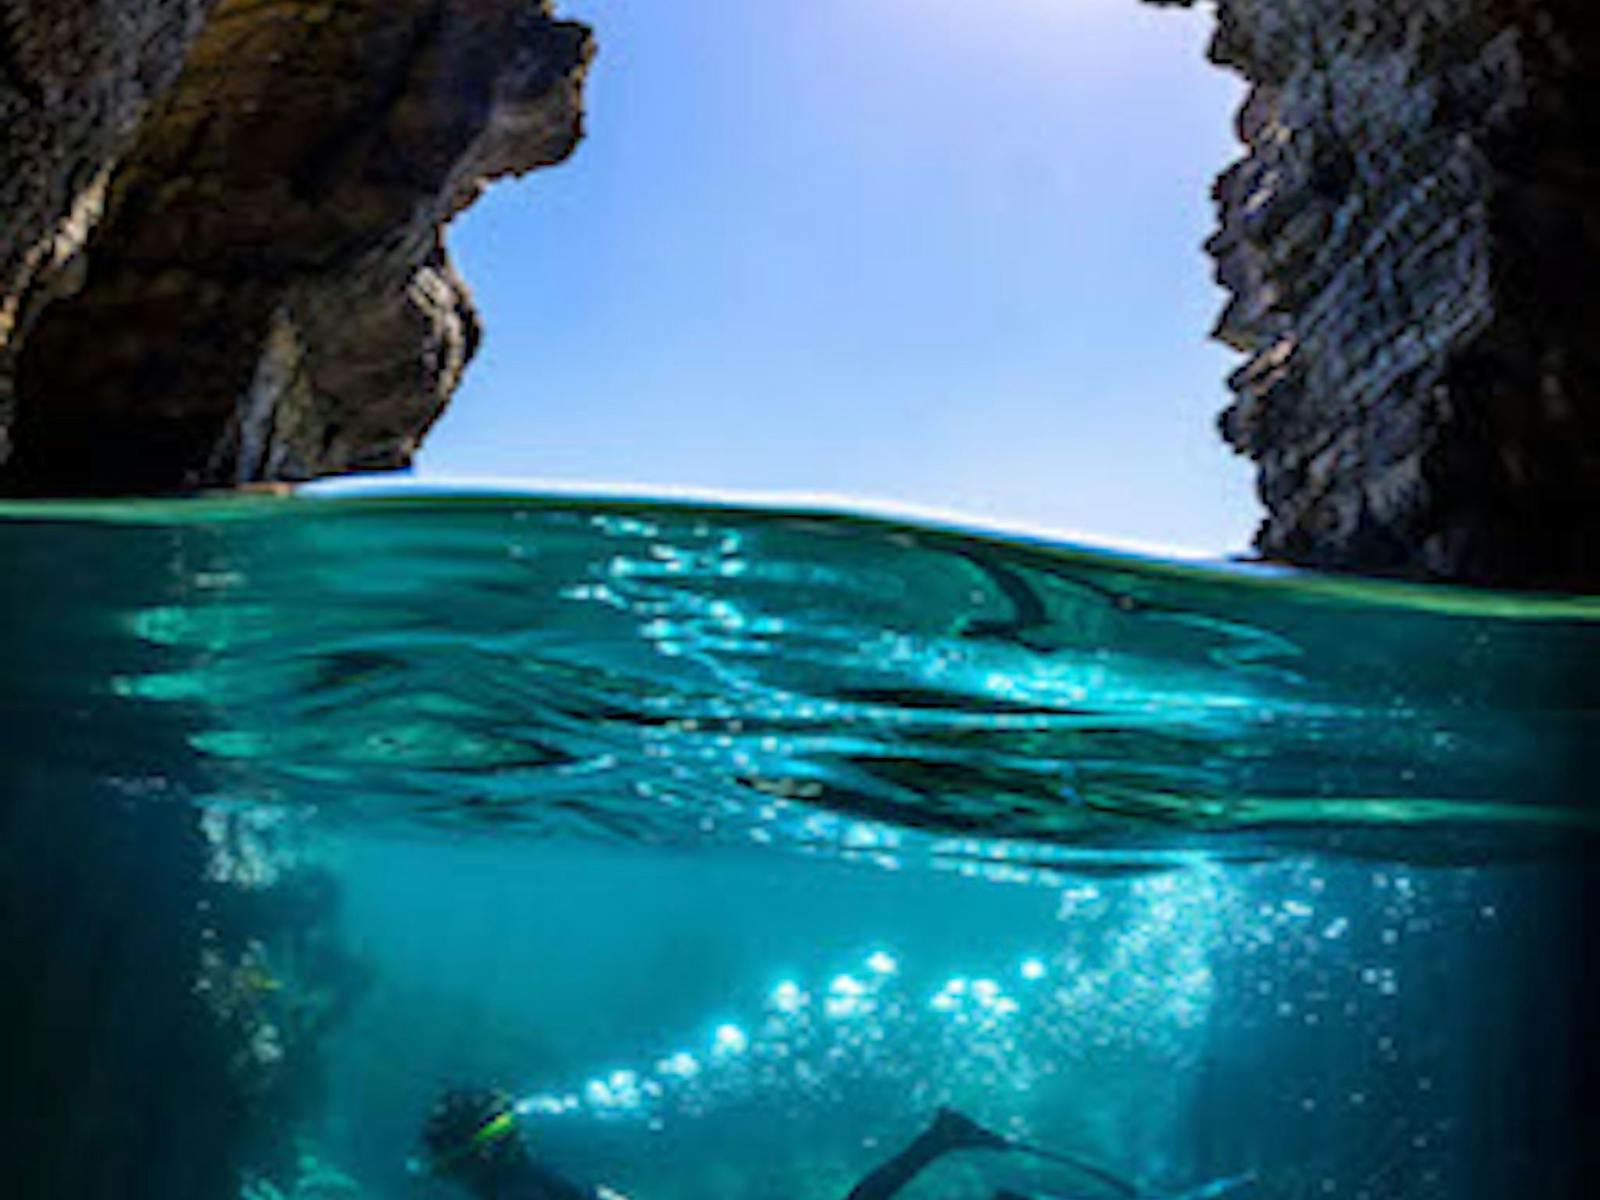 Freediving in the Sea caves, Jervis Bay, NSW